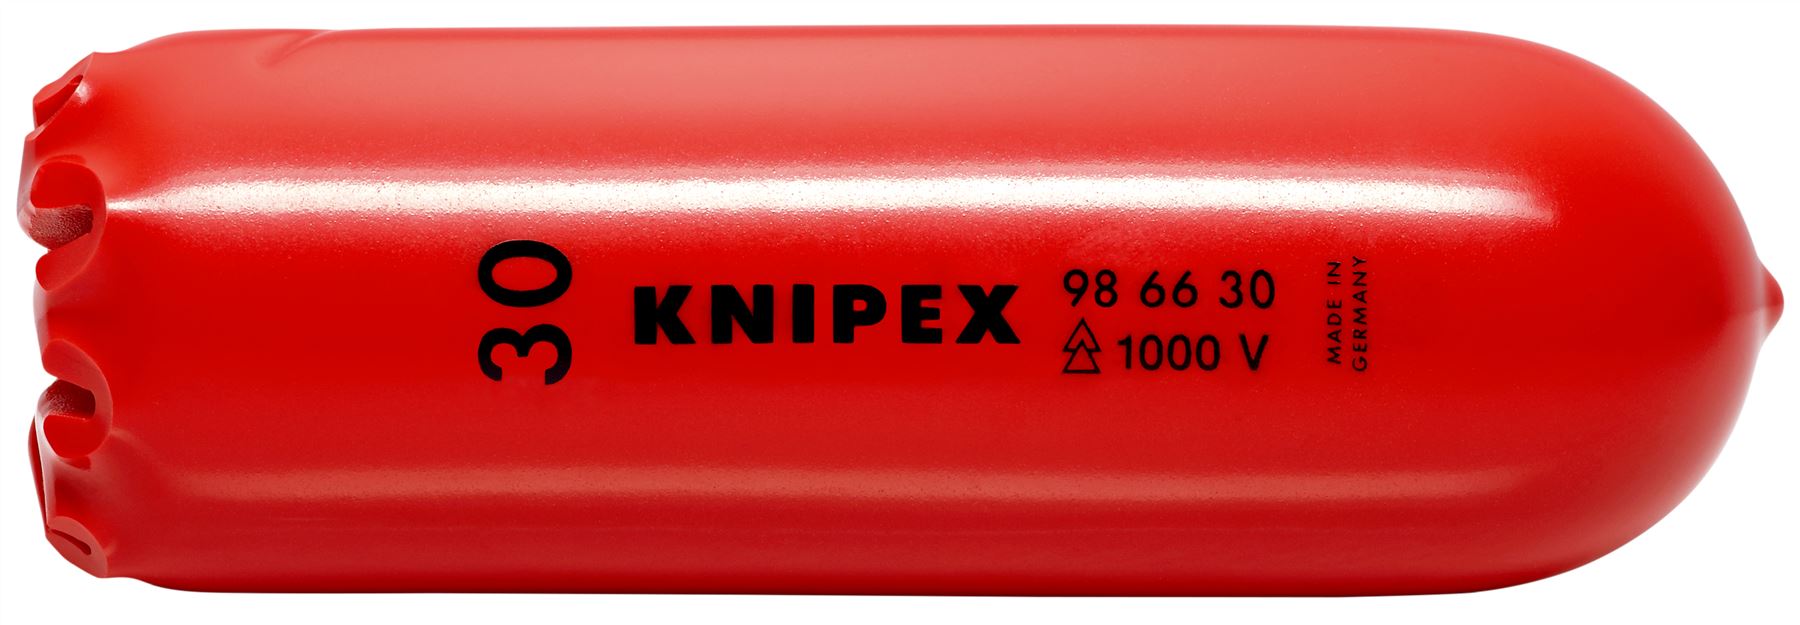 KNIPEX Self Clamping Slip On Cap 110mm to Cover Bare Live Cable Ends Insulated 1000V 98 66 30